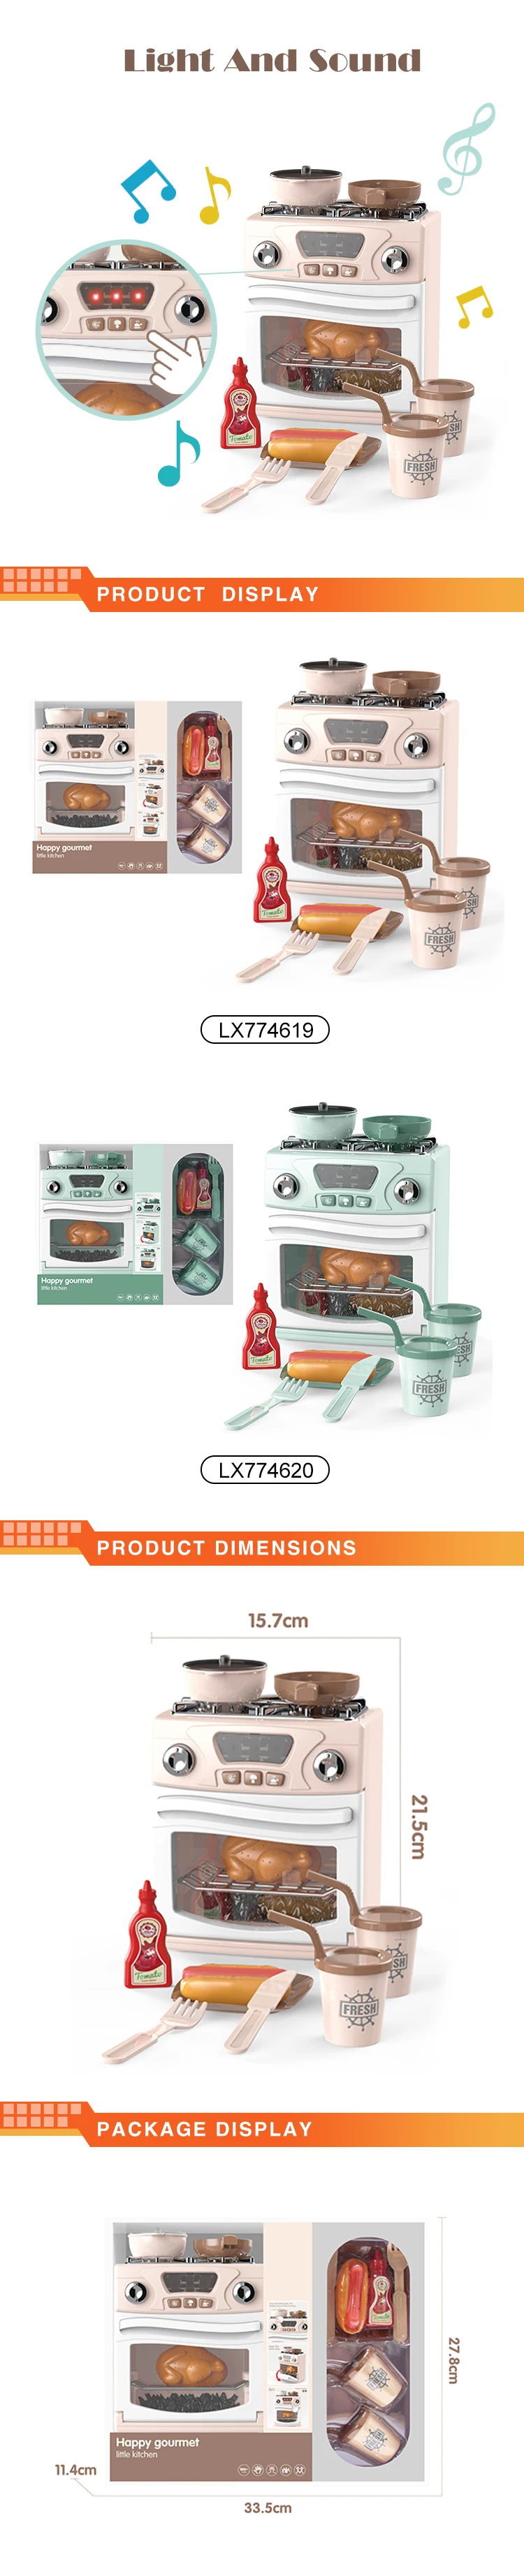 Kids educational kitchen toys set electric oven toy with sound and light